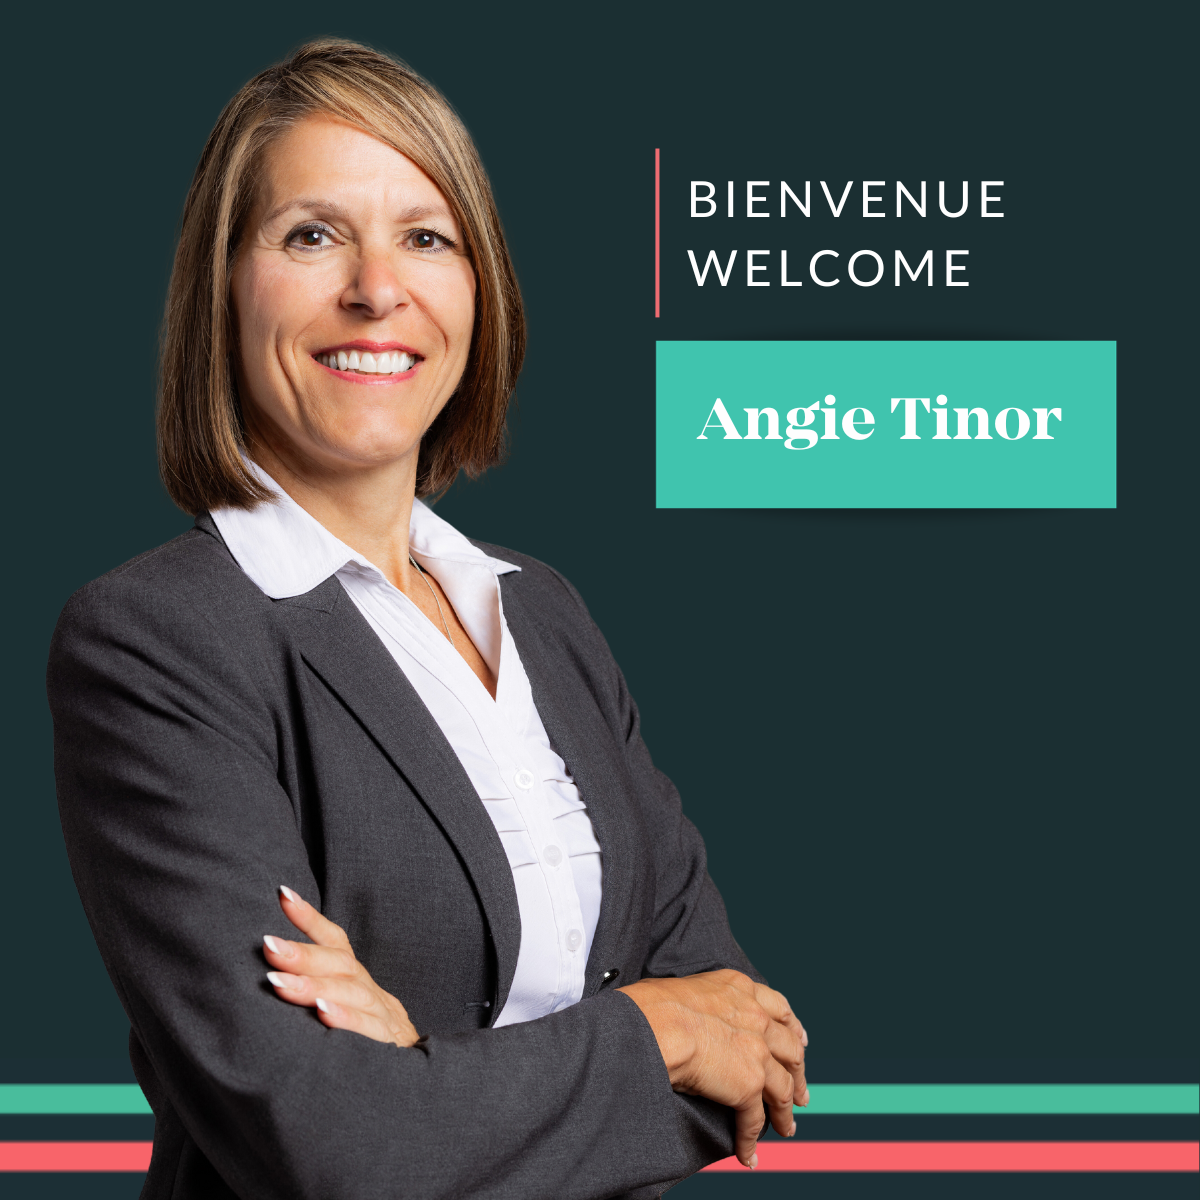 Angie Tinor joins DS Lawyers as National Vice President Operating Officer 